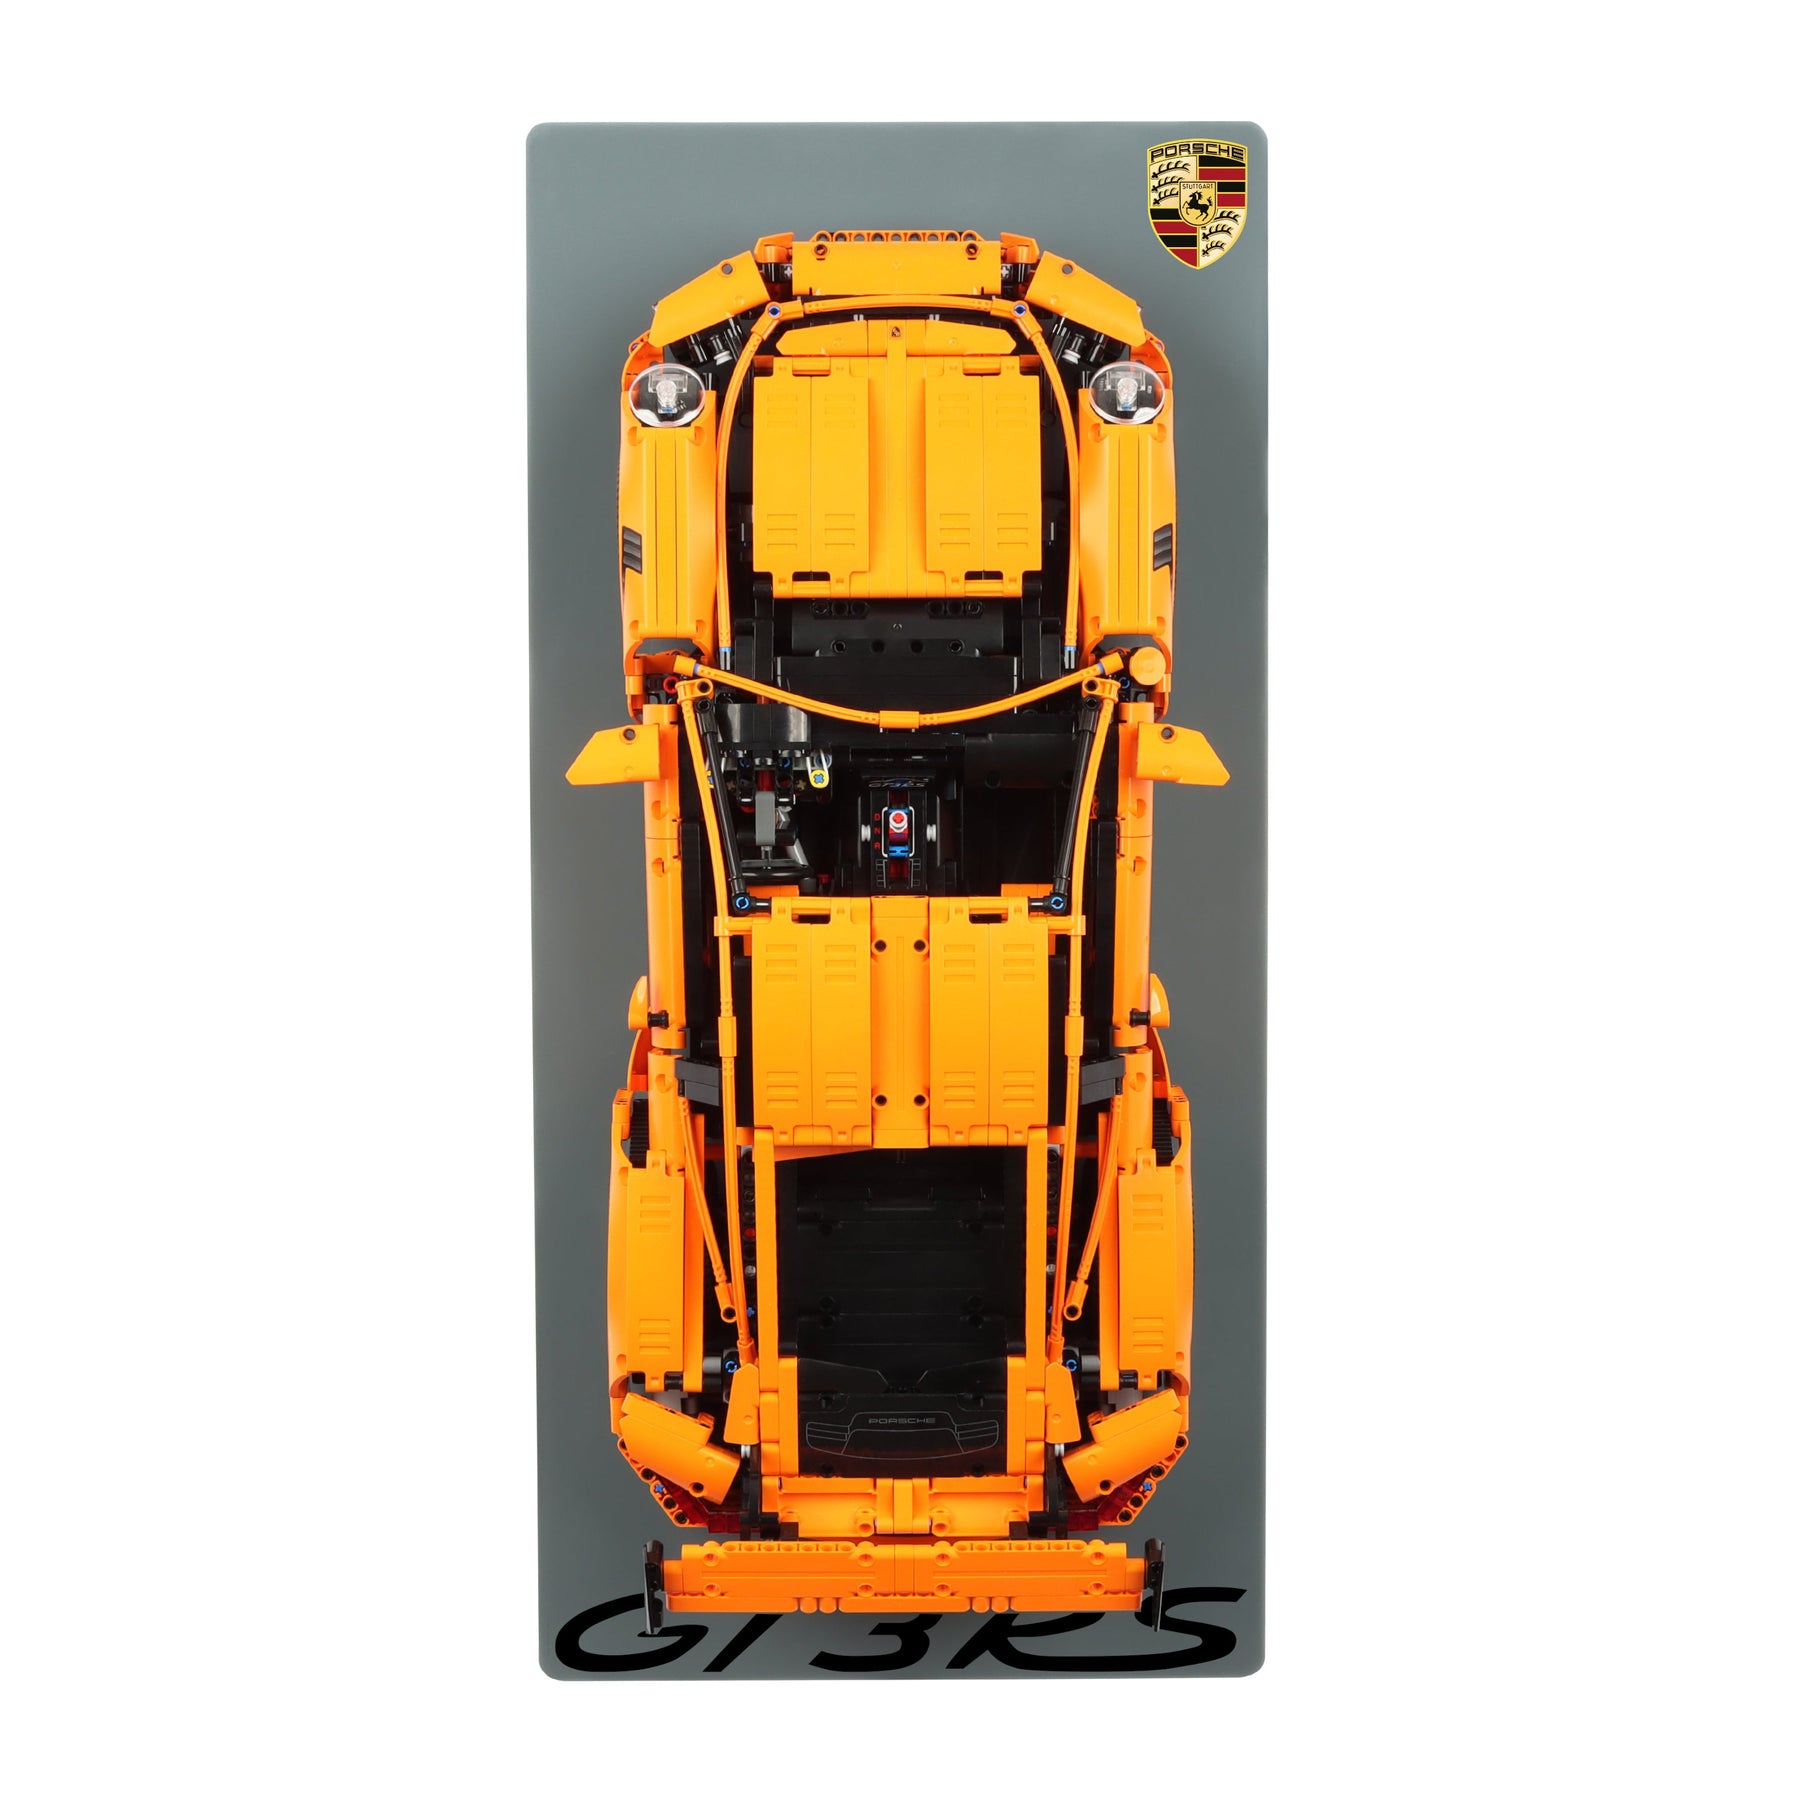 Wall display for LEGO 42056 Porsche 911 GT3 RS